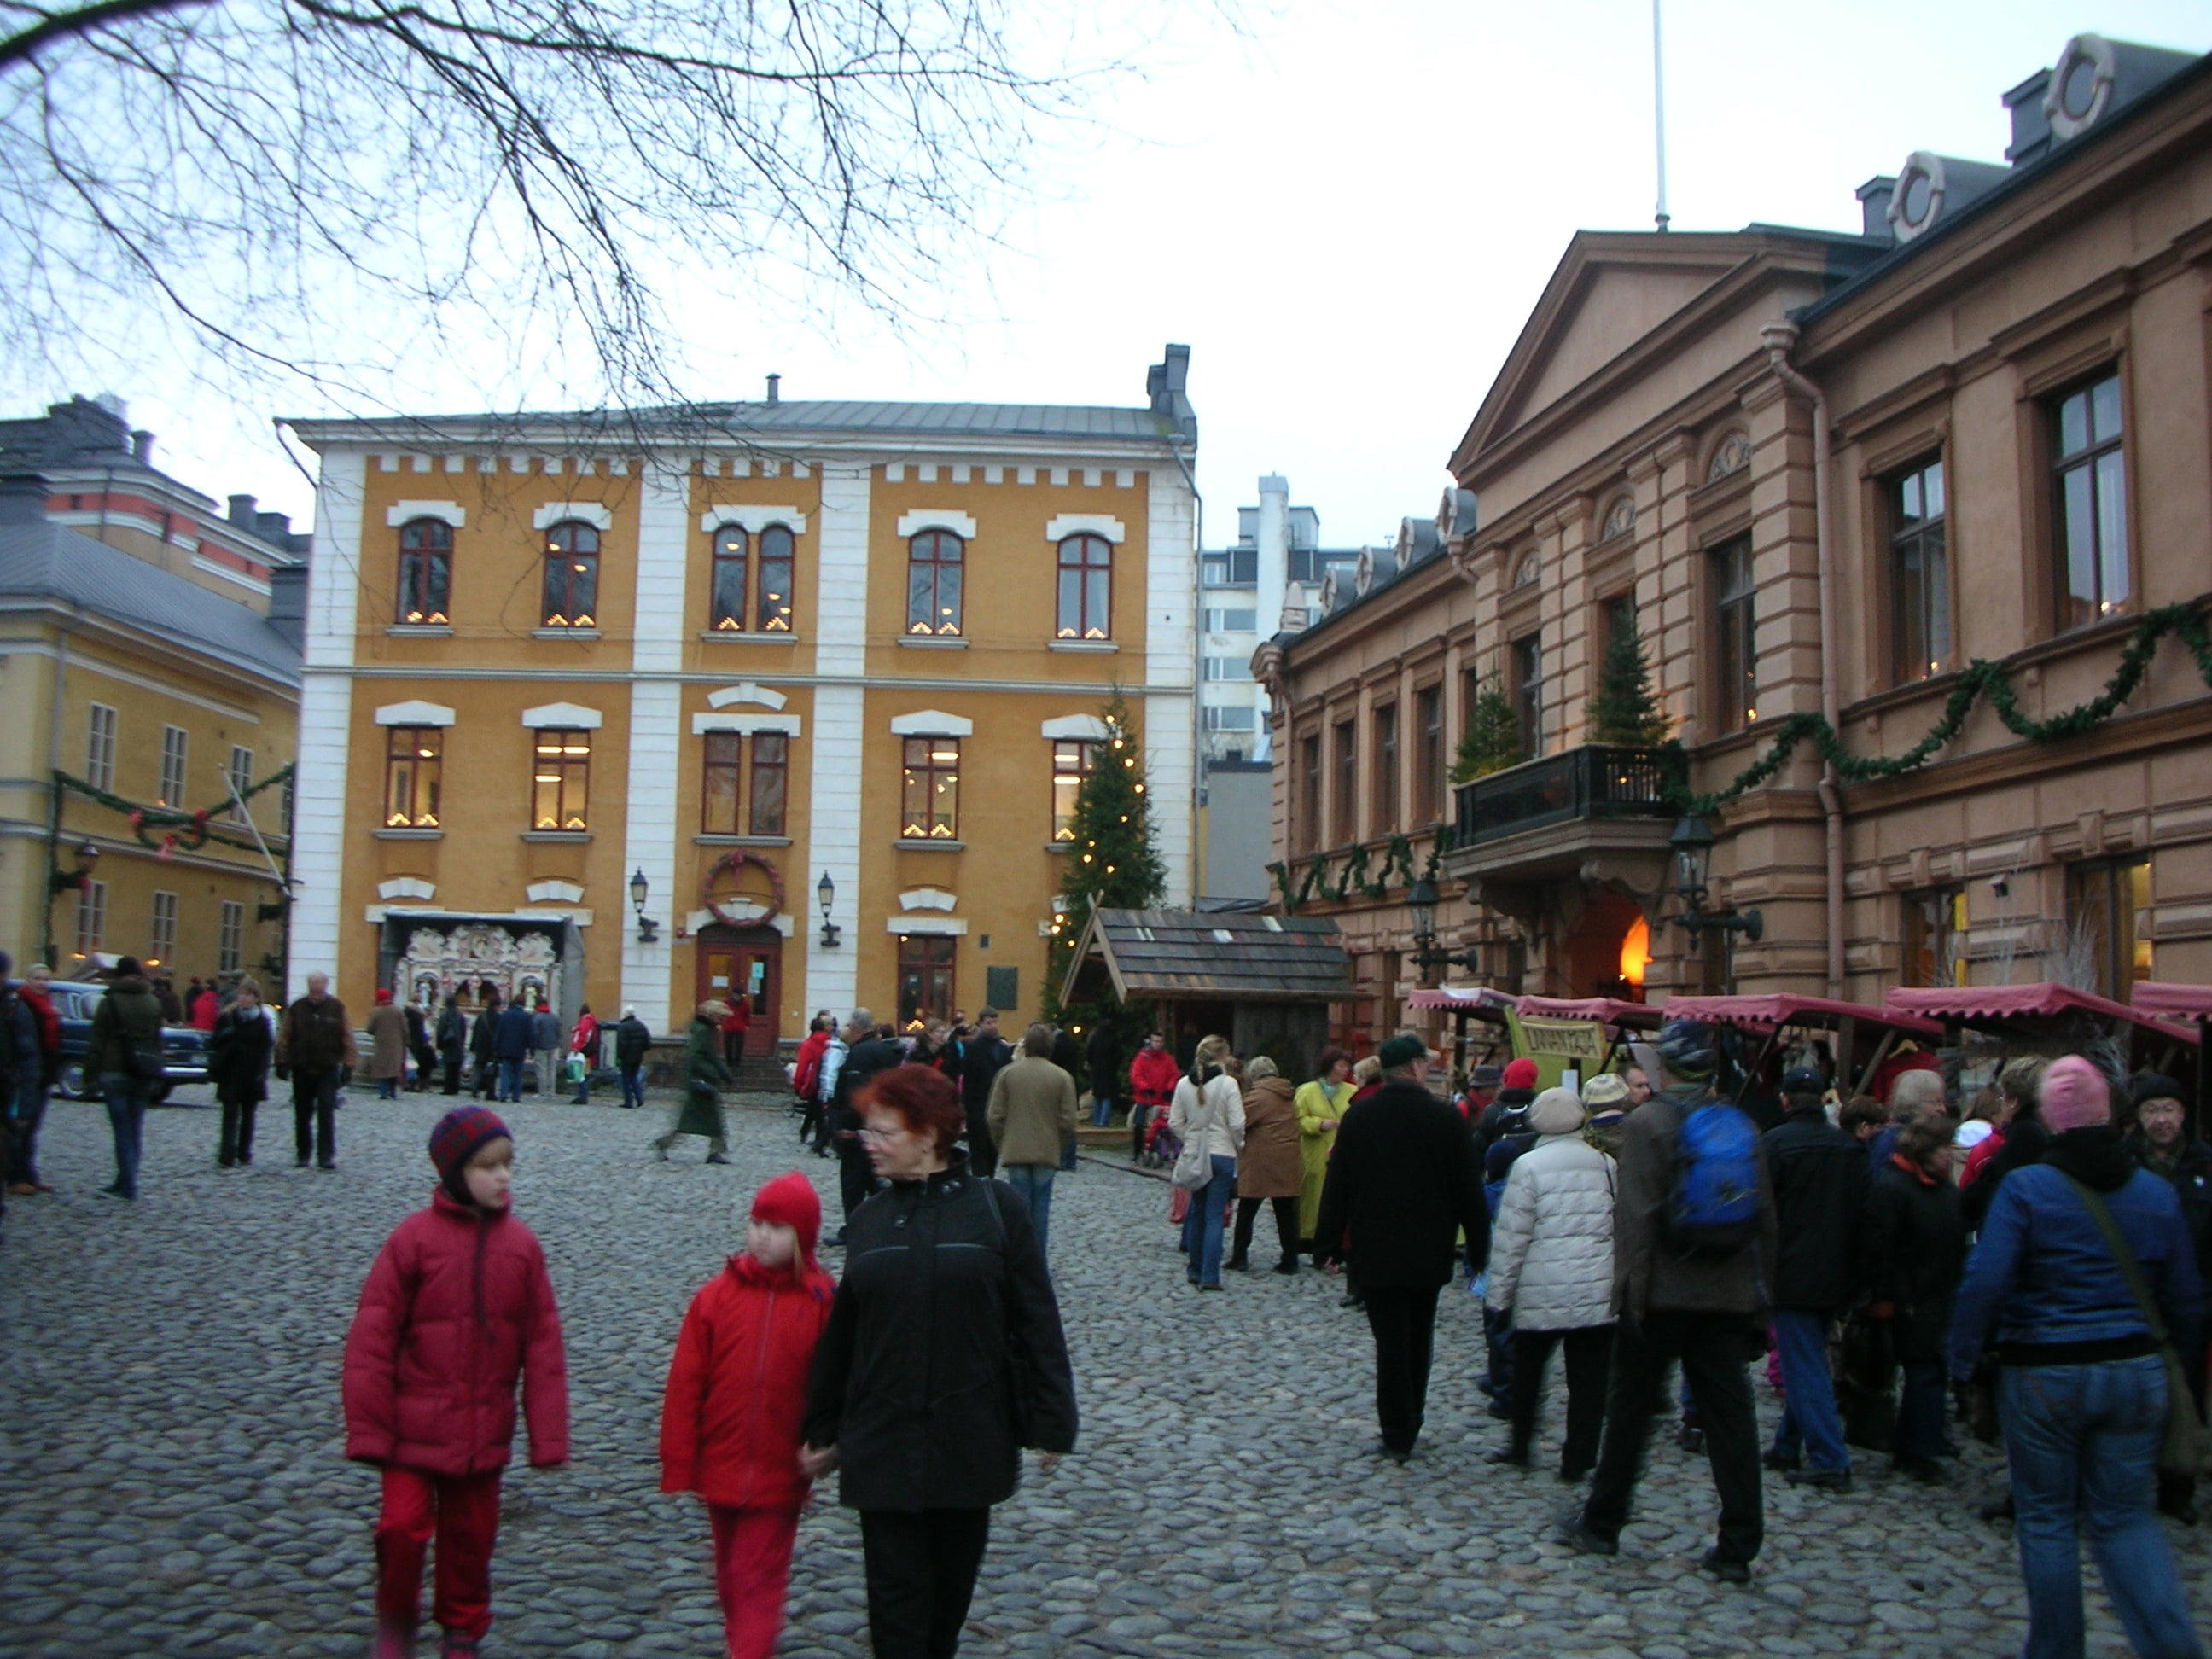 The Old Great Square